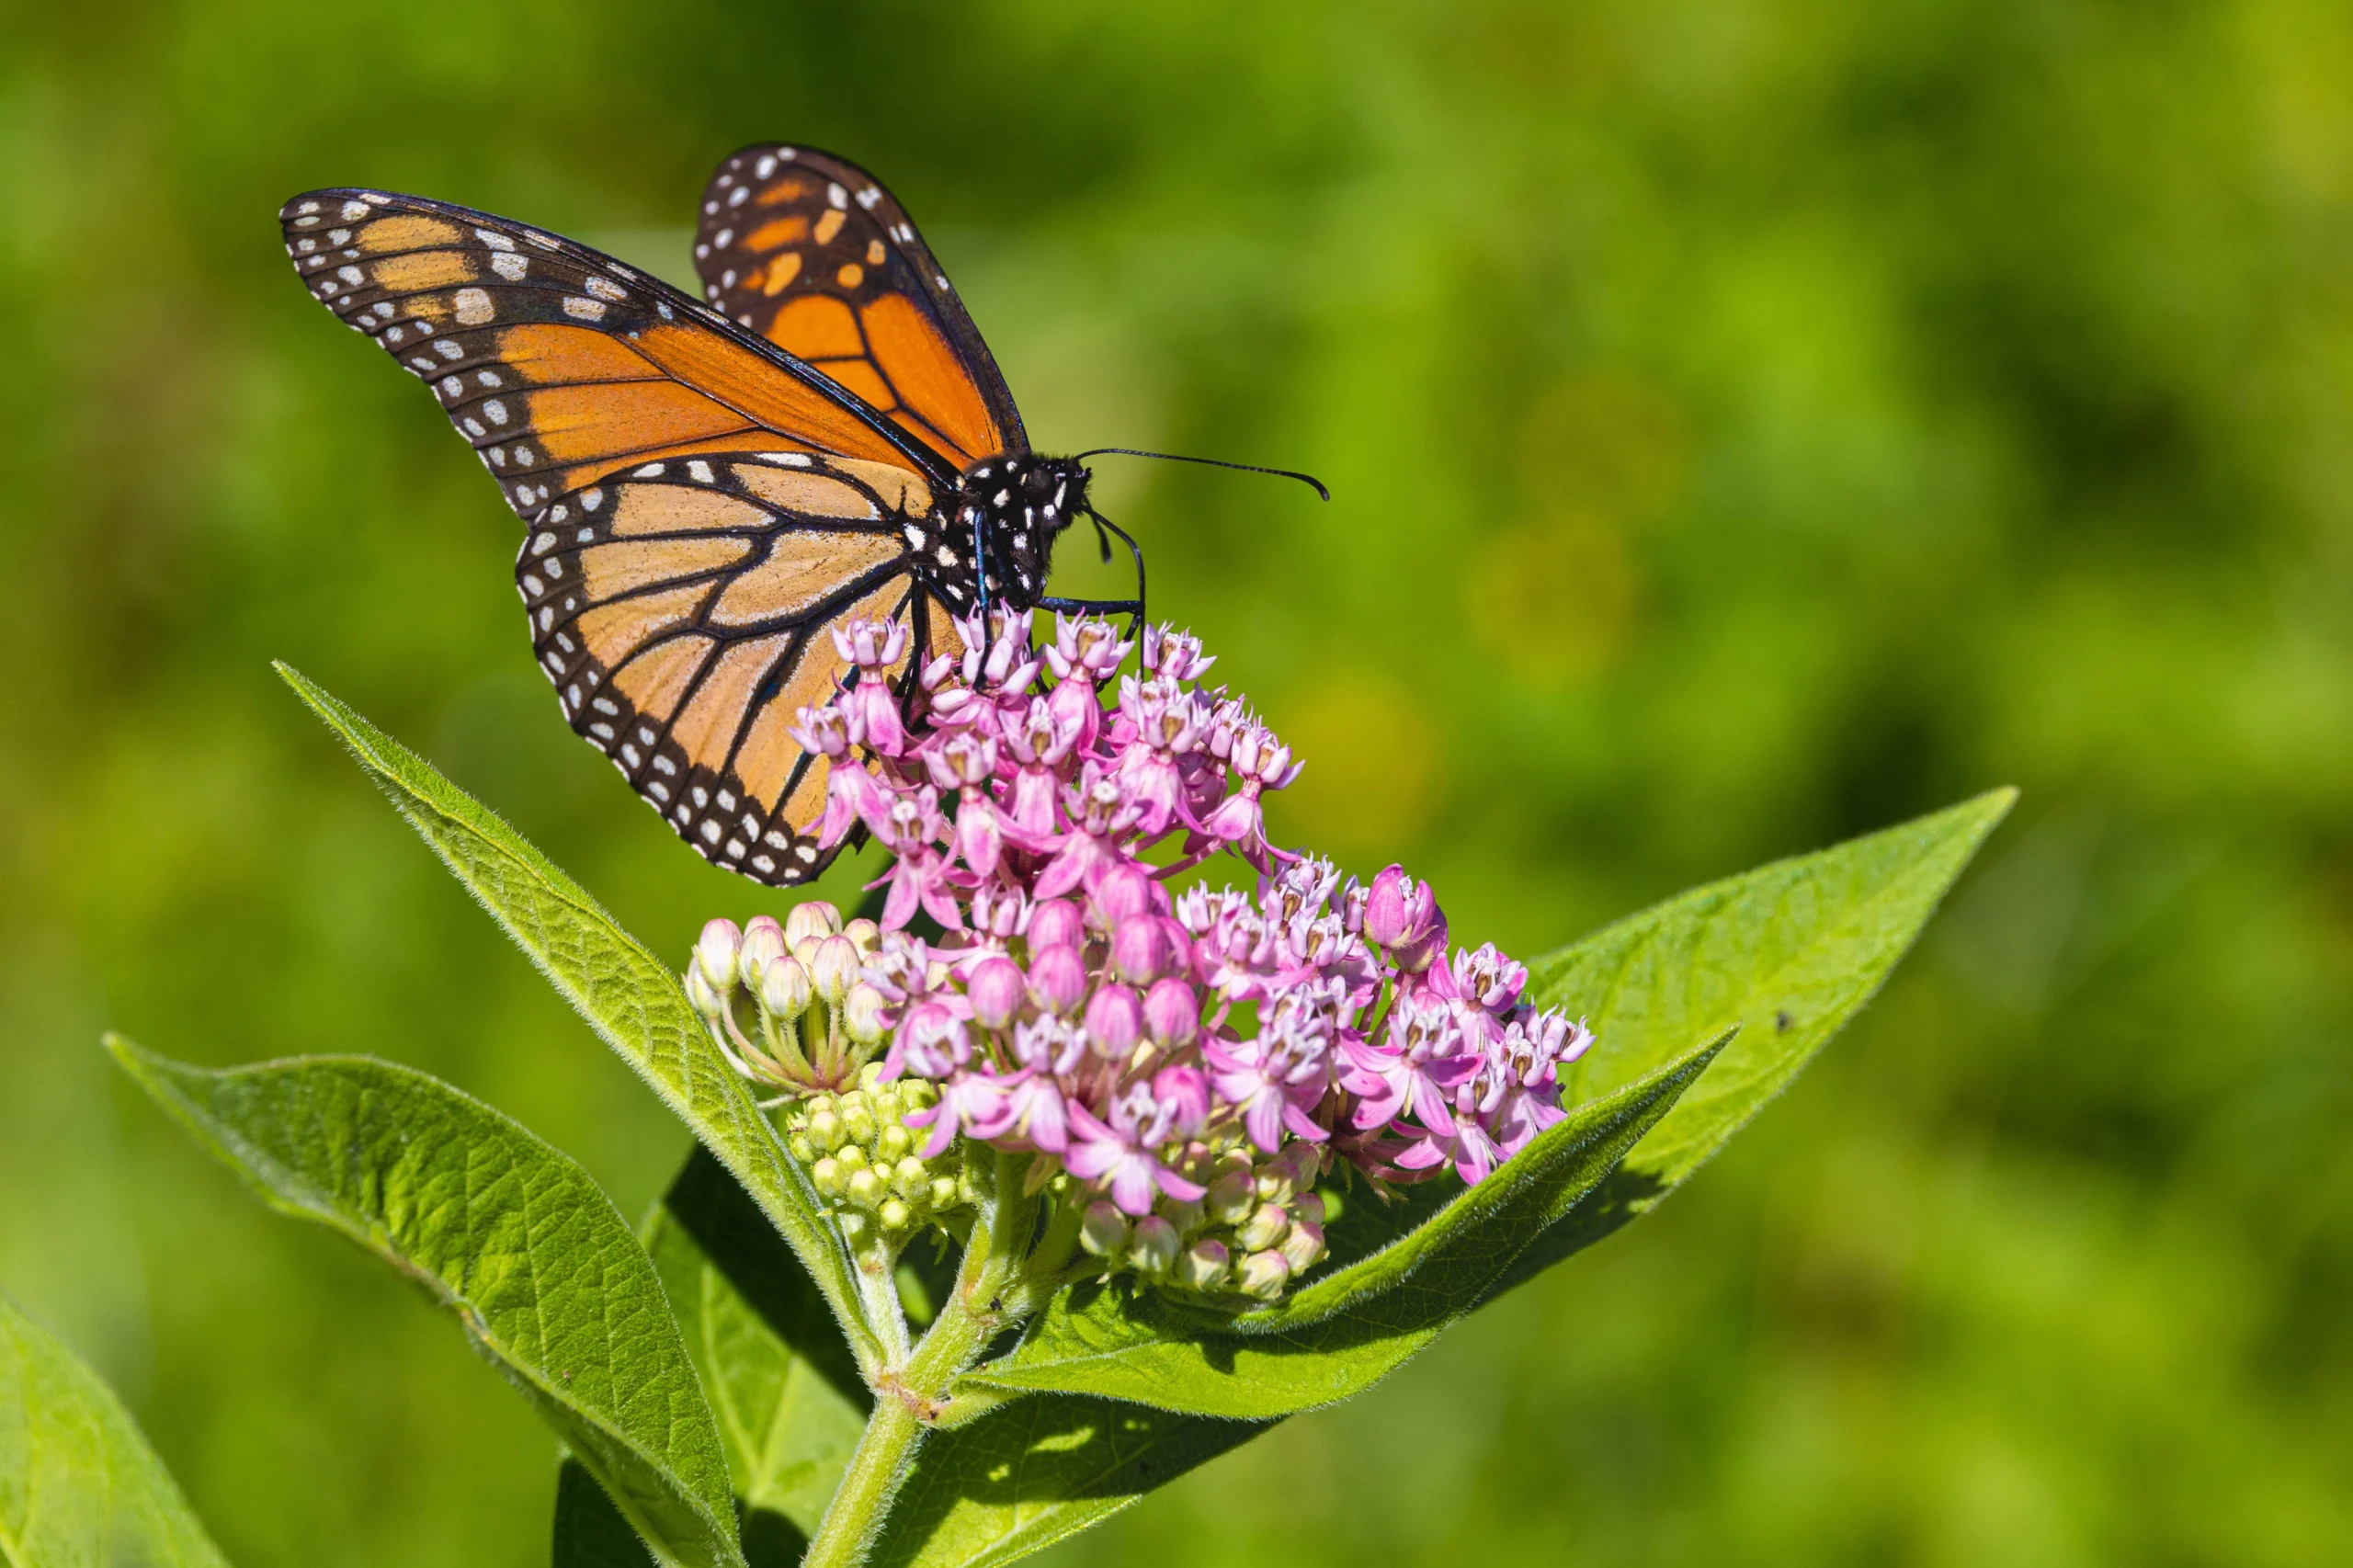 Native Wisconsin Perennials: Easy-Care Plants and Flowers for Your Wisconsin Garden